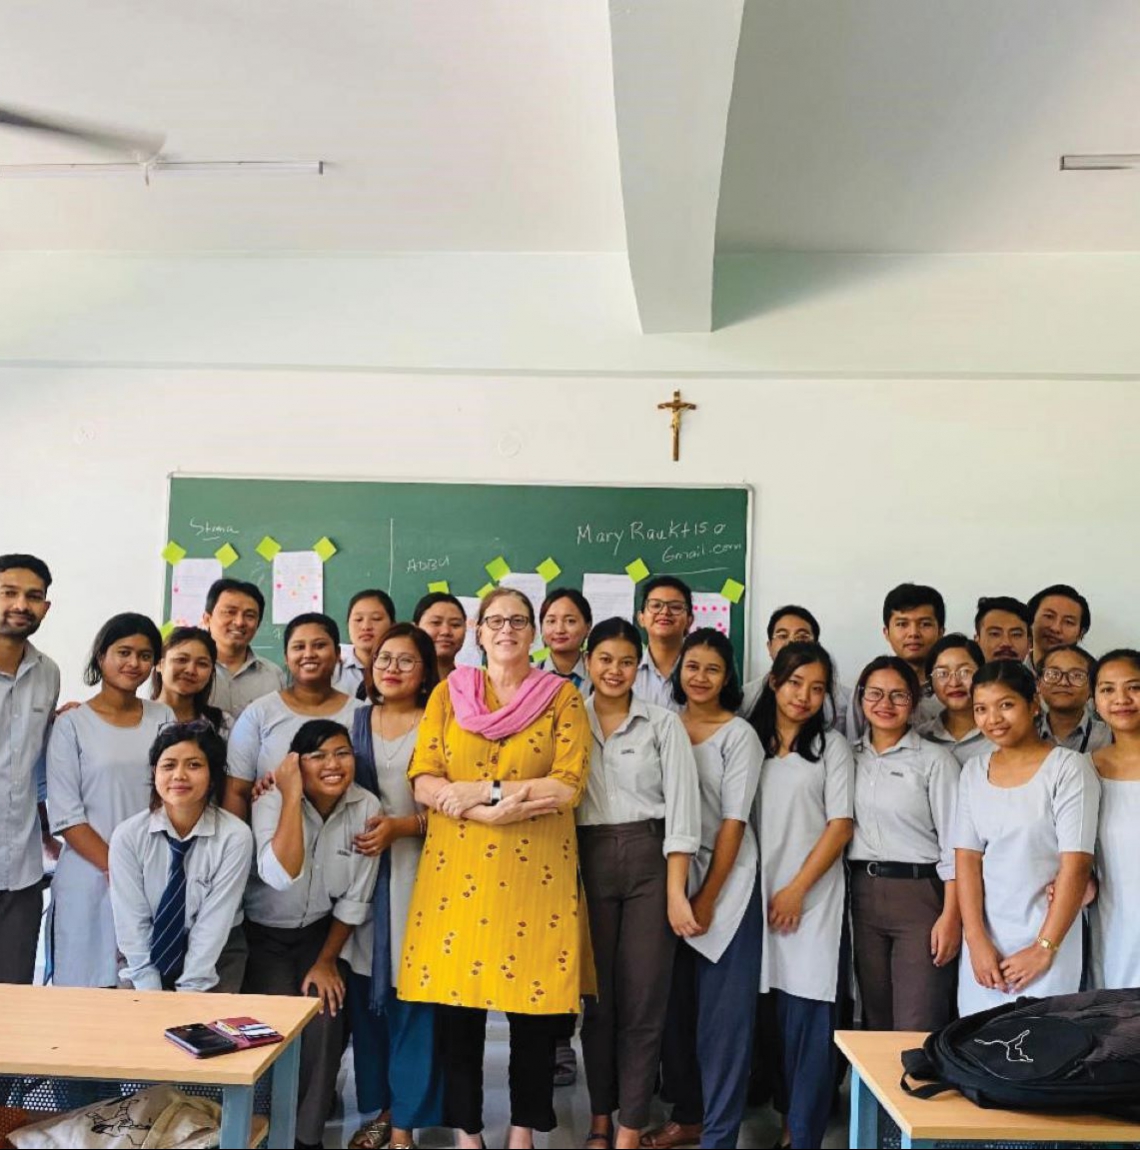 Dr. Rauktis with students in India